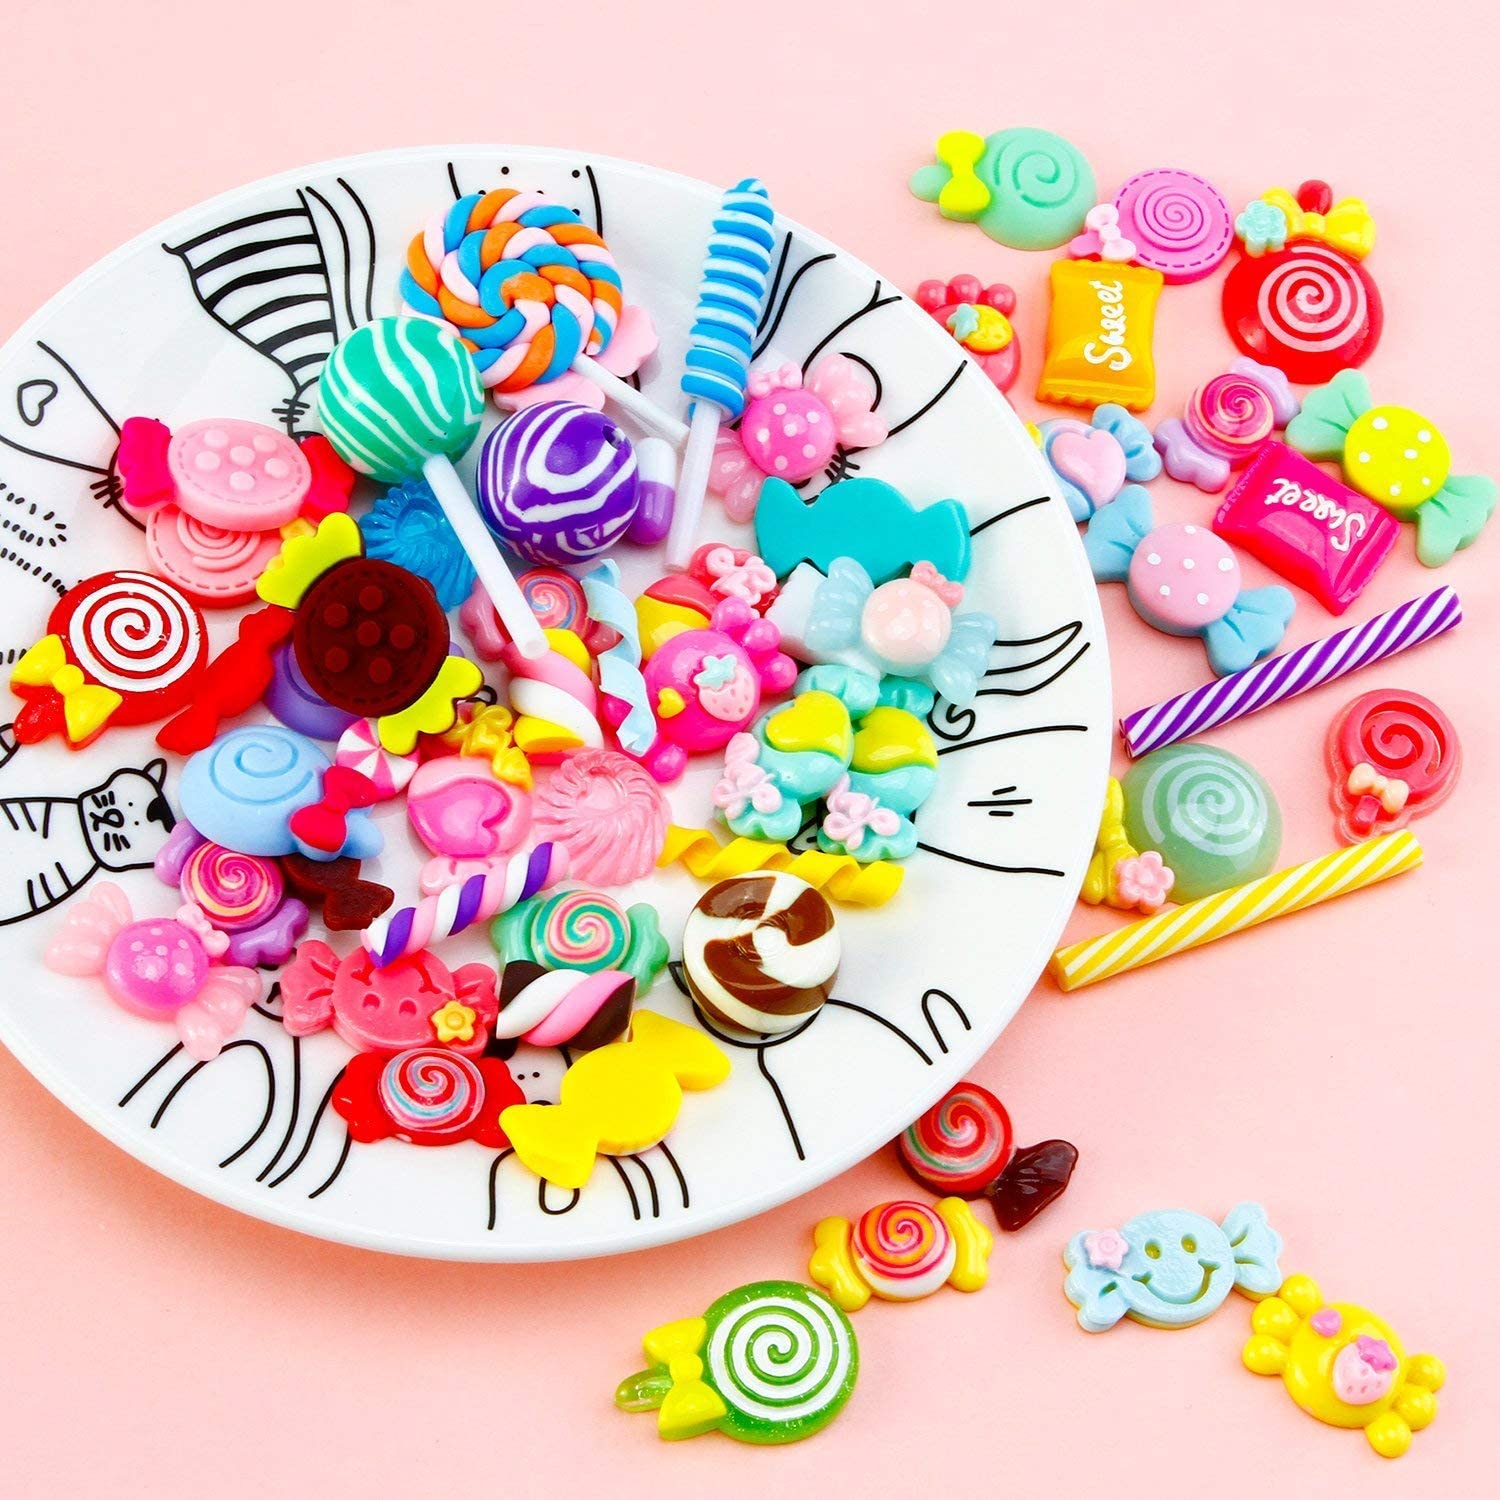 Amerteer 60Pieces of Slime Charm Cute Set Resin Charm Mixed Assorted Candies Candy Resin Flat Back Slime Beads Making Supplies for DIY Craft Making and Decoration Scrapbook - image 2 of 8